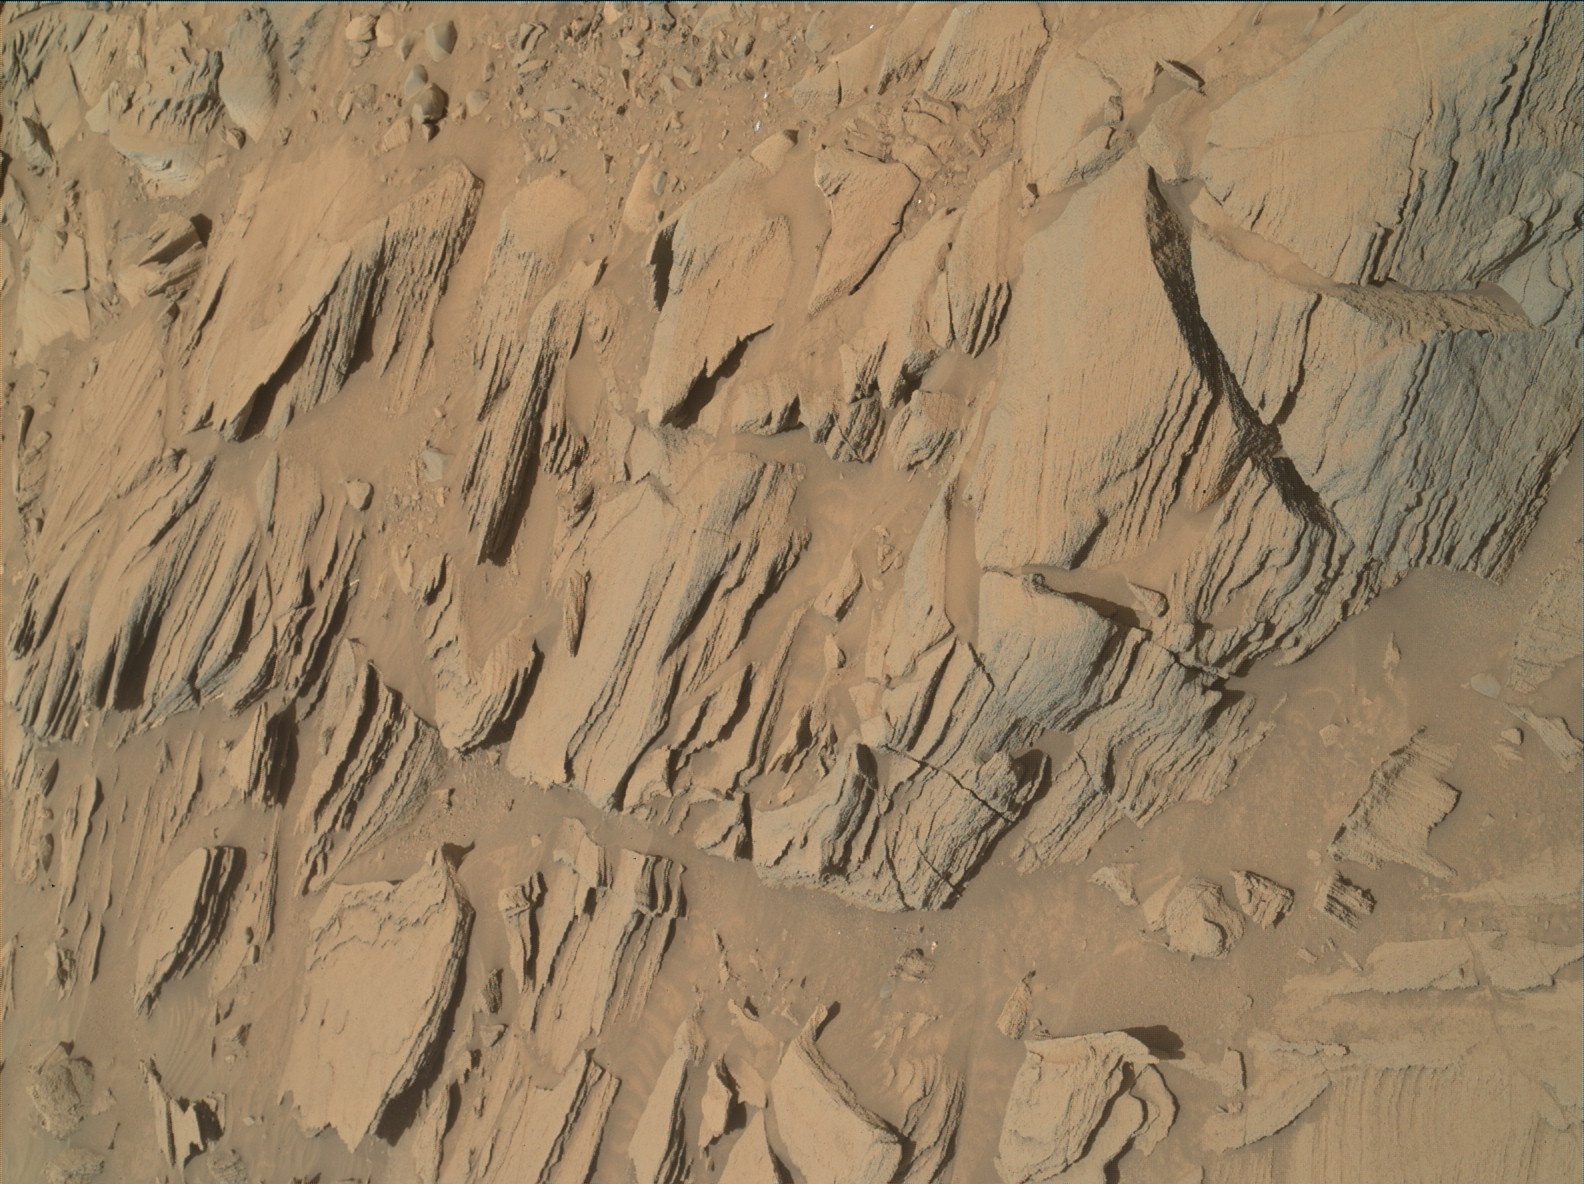 Nasa's Mars rover Curiosity acquired this image using its Mars Hand Lens Imager (MAHLI) on Sol 1338